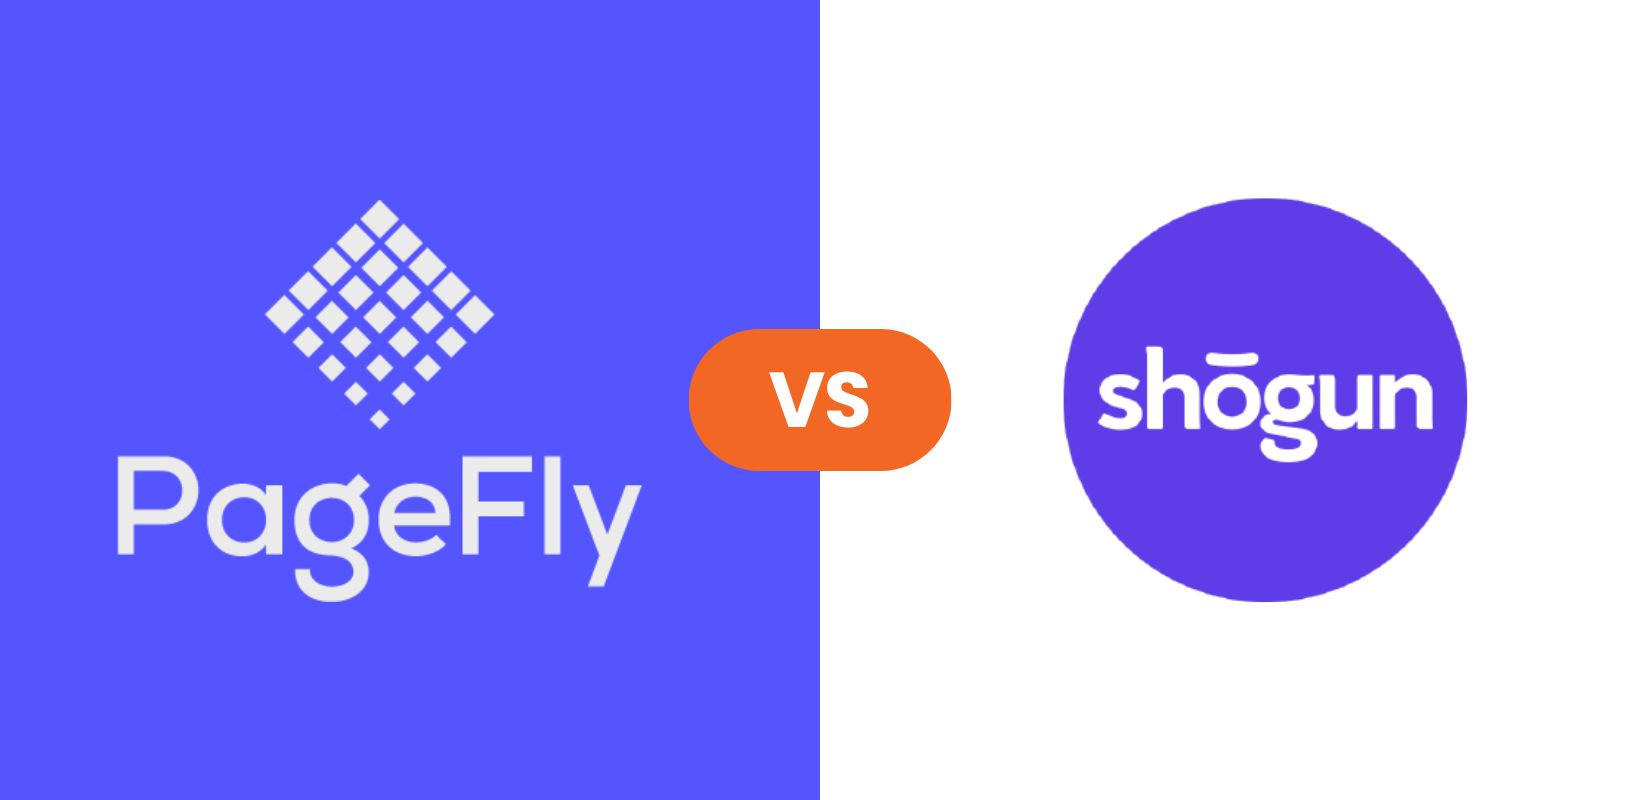 Pagefly Vs Shogun: Which is Best for your Shopify Online Shop?